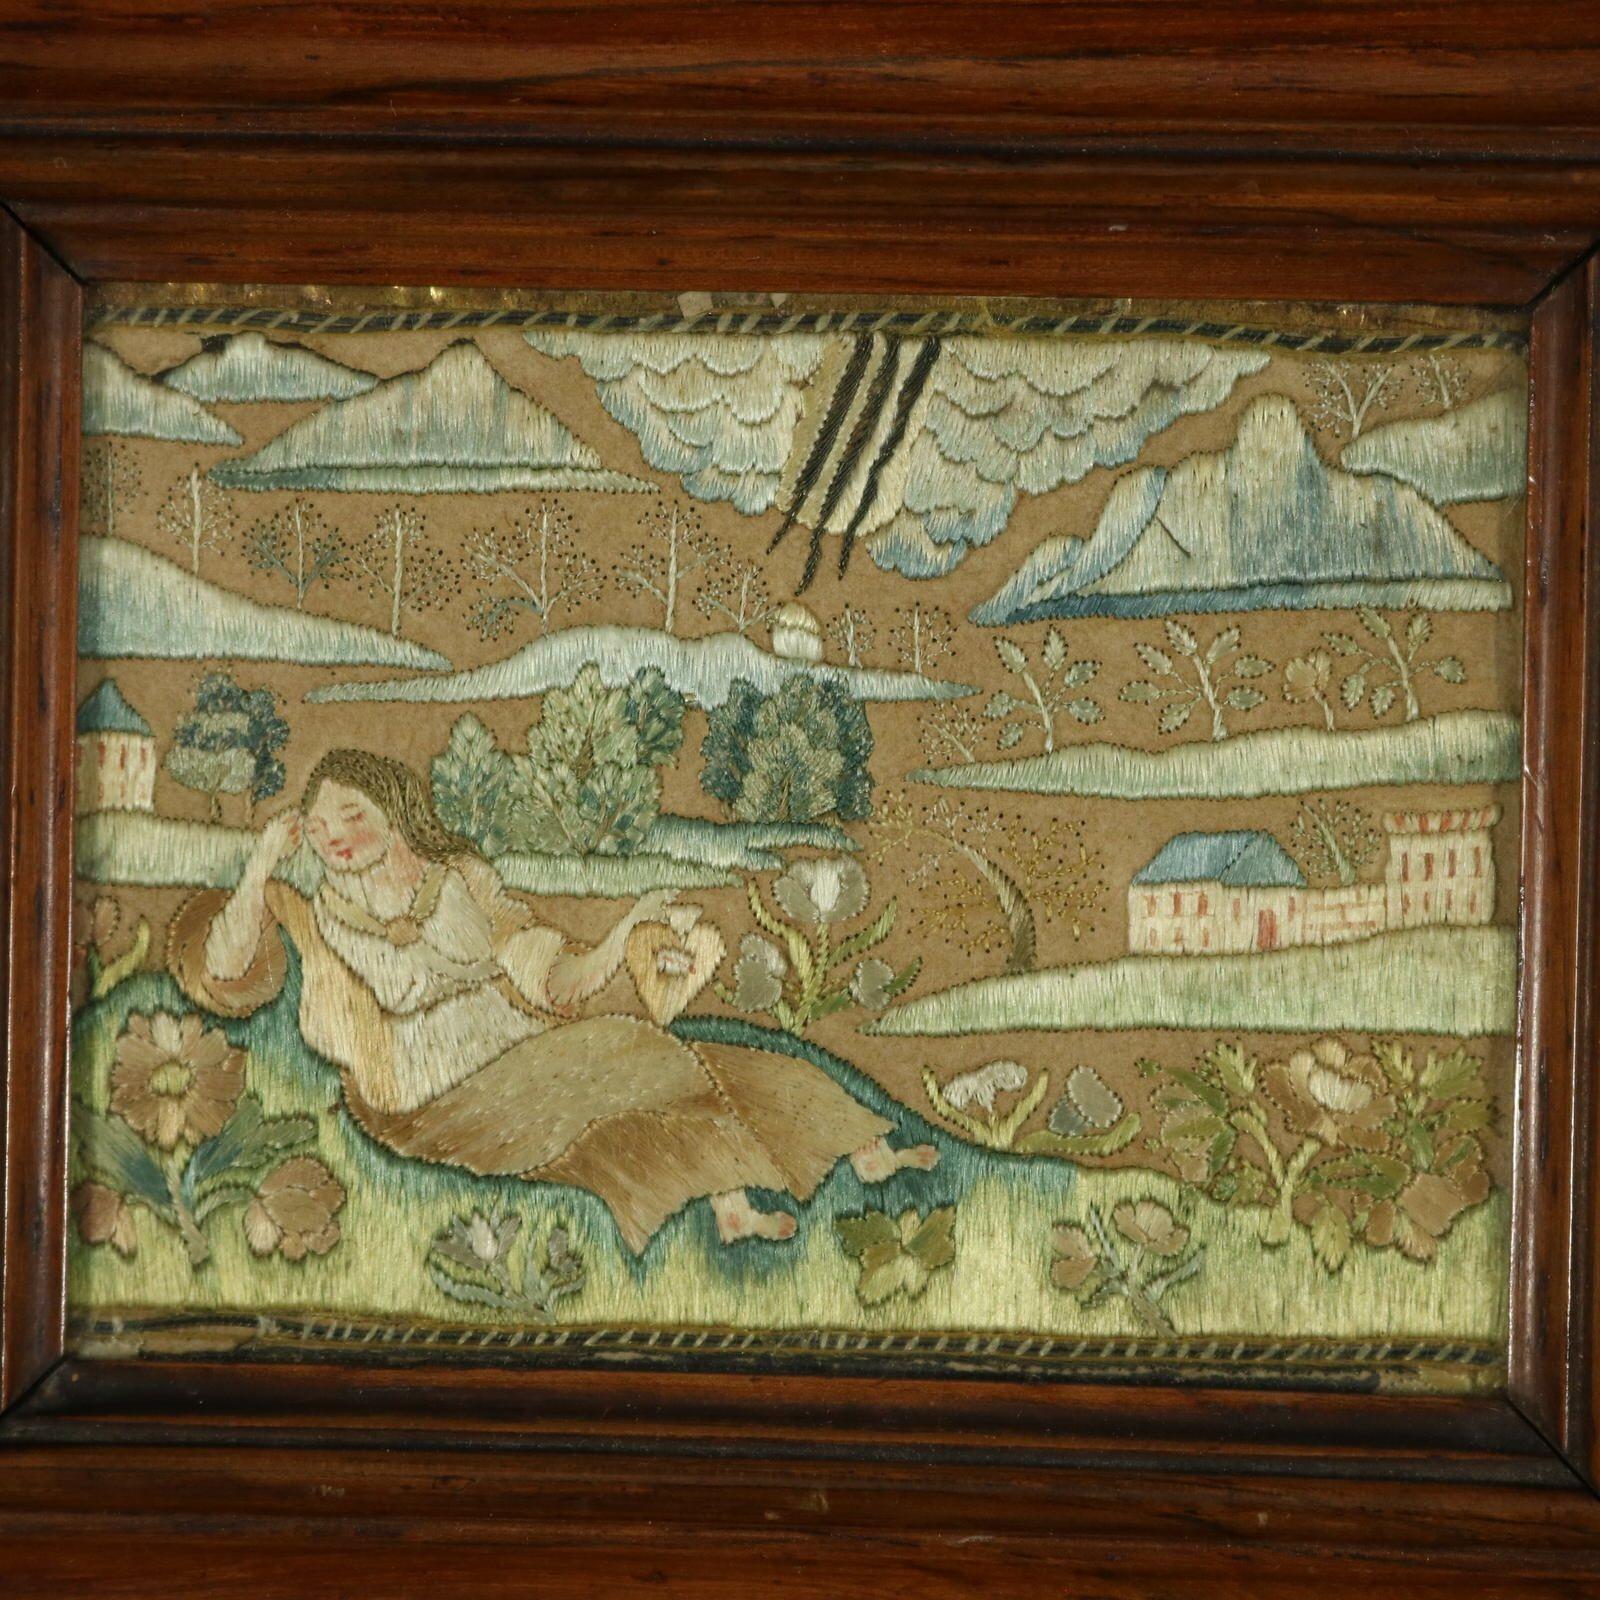 Late 17th Century, Miniature Silkwork Embroidery Reversable Picture. The embroidery is extremely finely worked in coloured silk threads on a paper or felt ground. Colours blues, greens, creams and browns. Pictorial scene depicts a lady, recumbent on